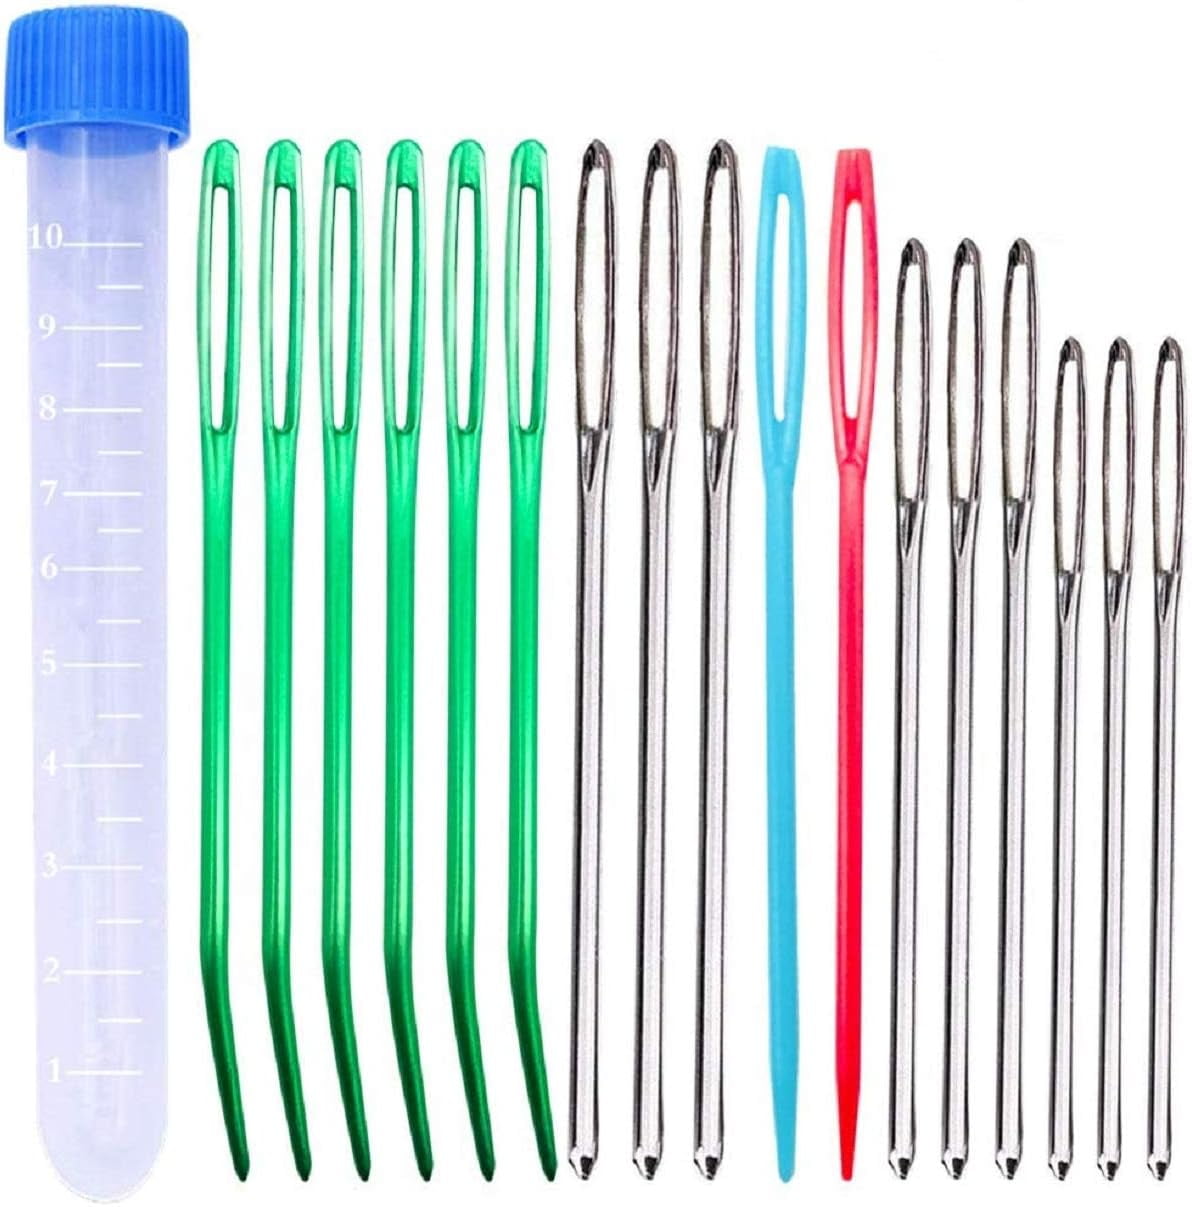 Large-Eye Blunt Needles, Stainless Steel Yarn Knitting Needles, Sewing  Needles, Crafting Knitting Weaving Stringing Needles,Perfect for Finishing  Off Crochet Projects (18 Pieces) 